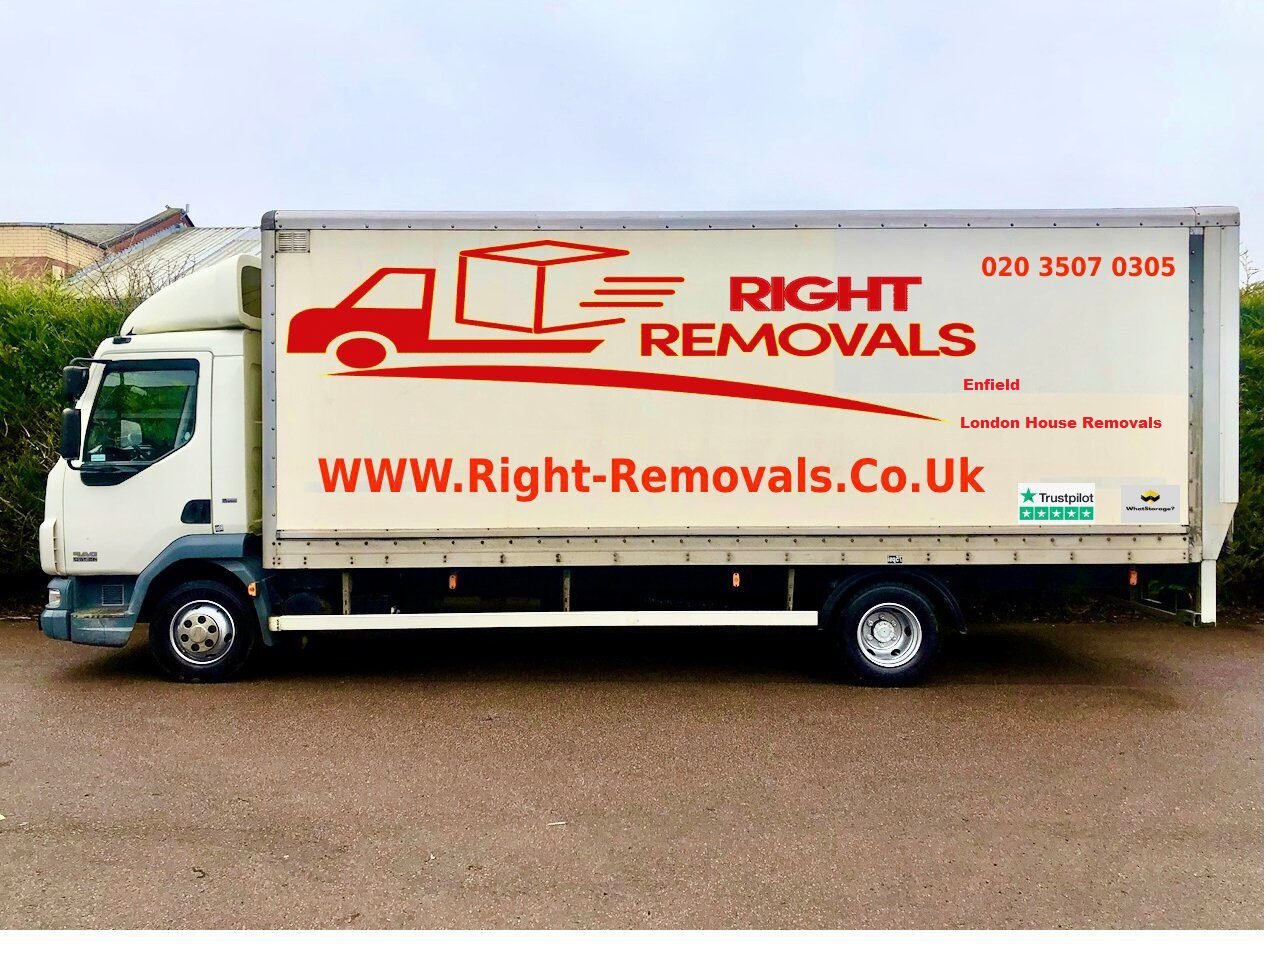 Get The Best London House Removals Service In Enfield From Fully Insured Experts